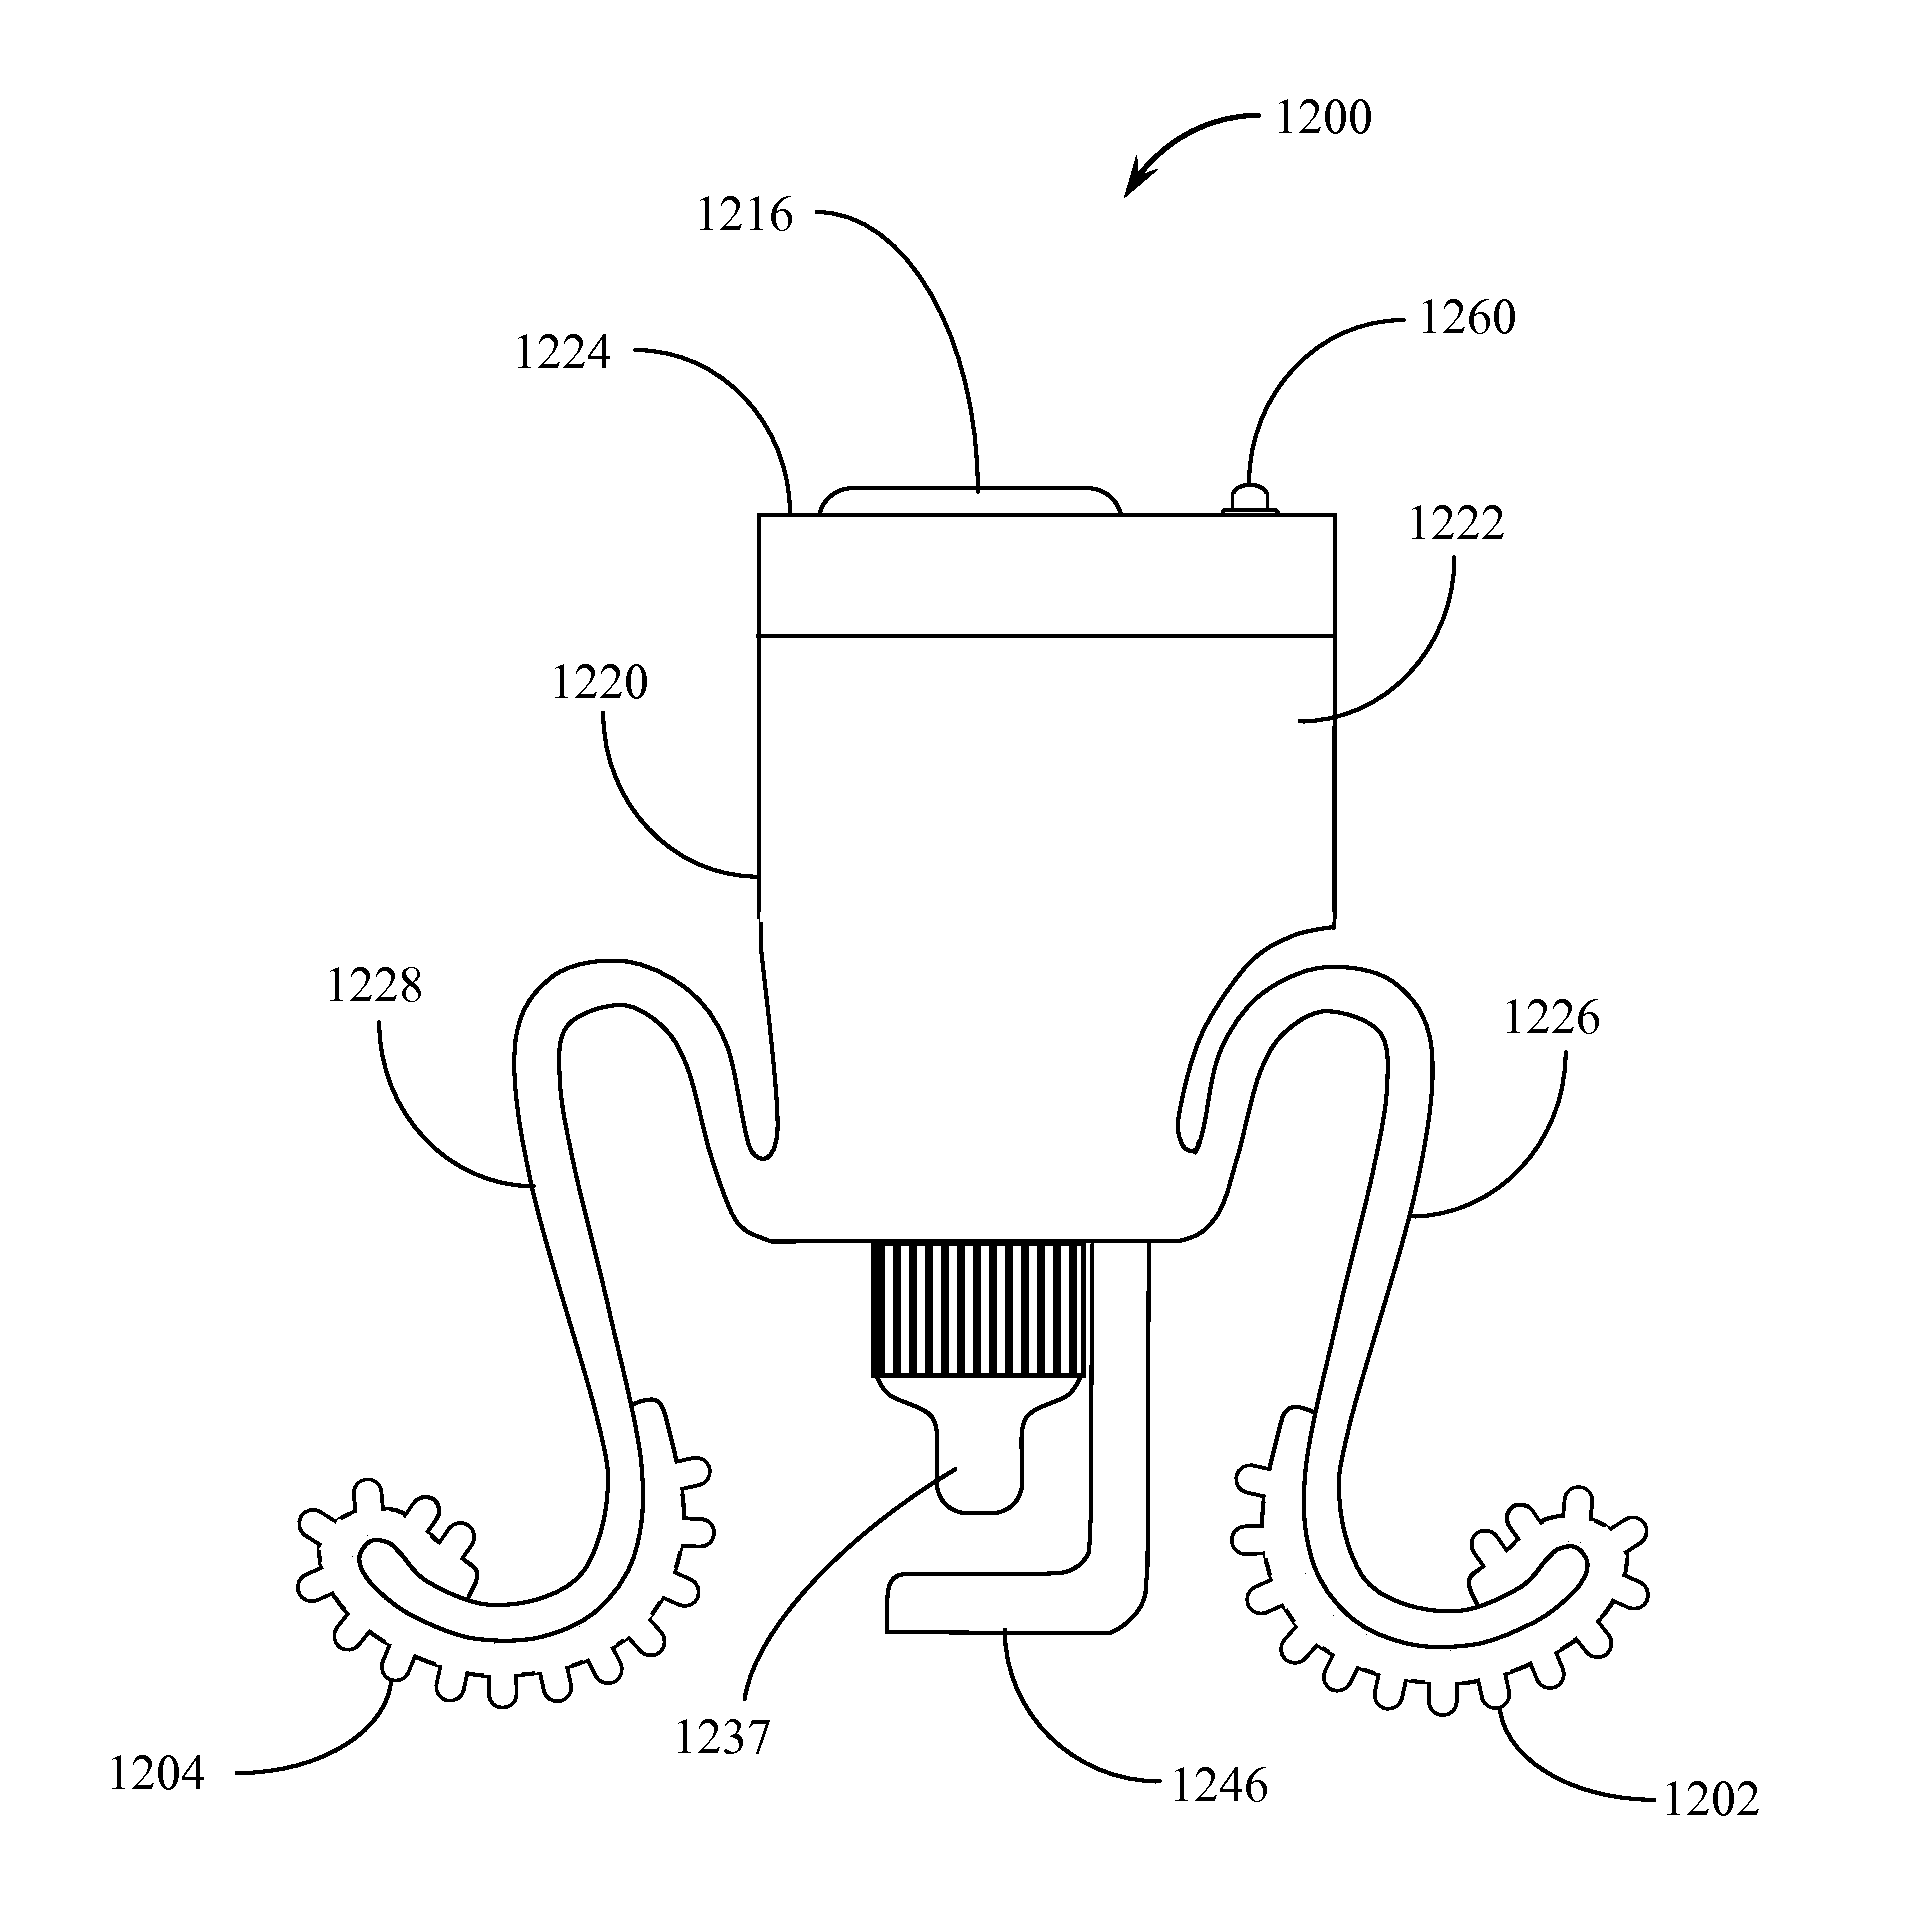 Automated Incremental Eyedrop Delivery System with Eyelid Retracting Legs